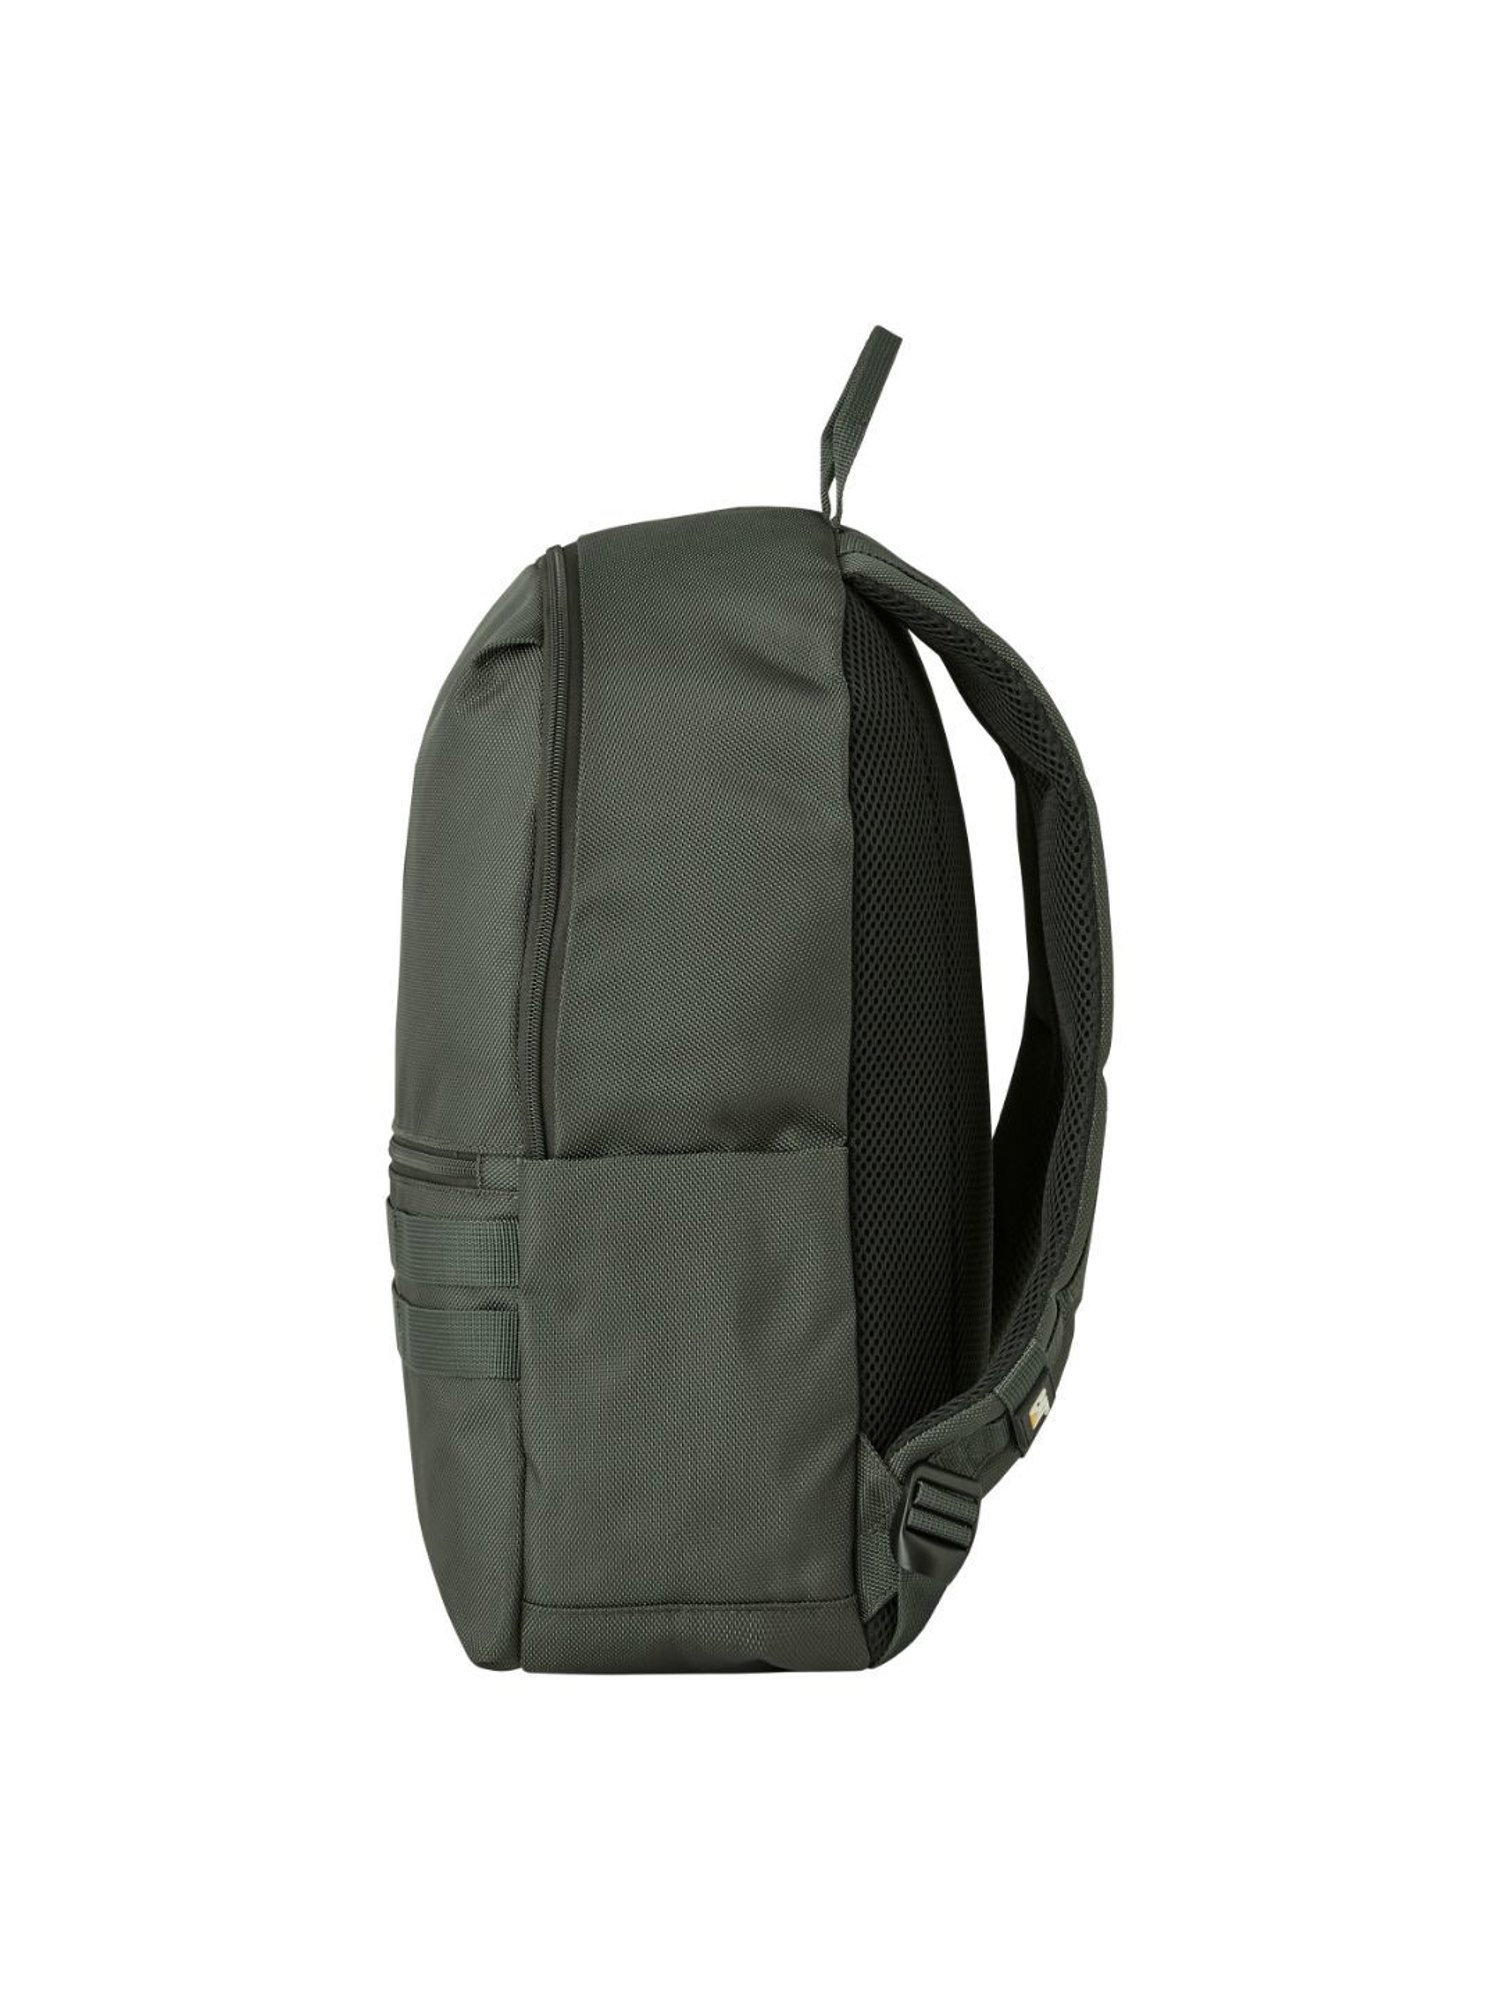 Best Backpack Cooler Chair | Portal Outdoors Olive Green